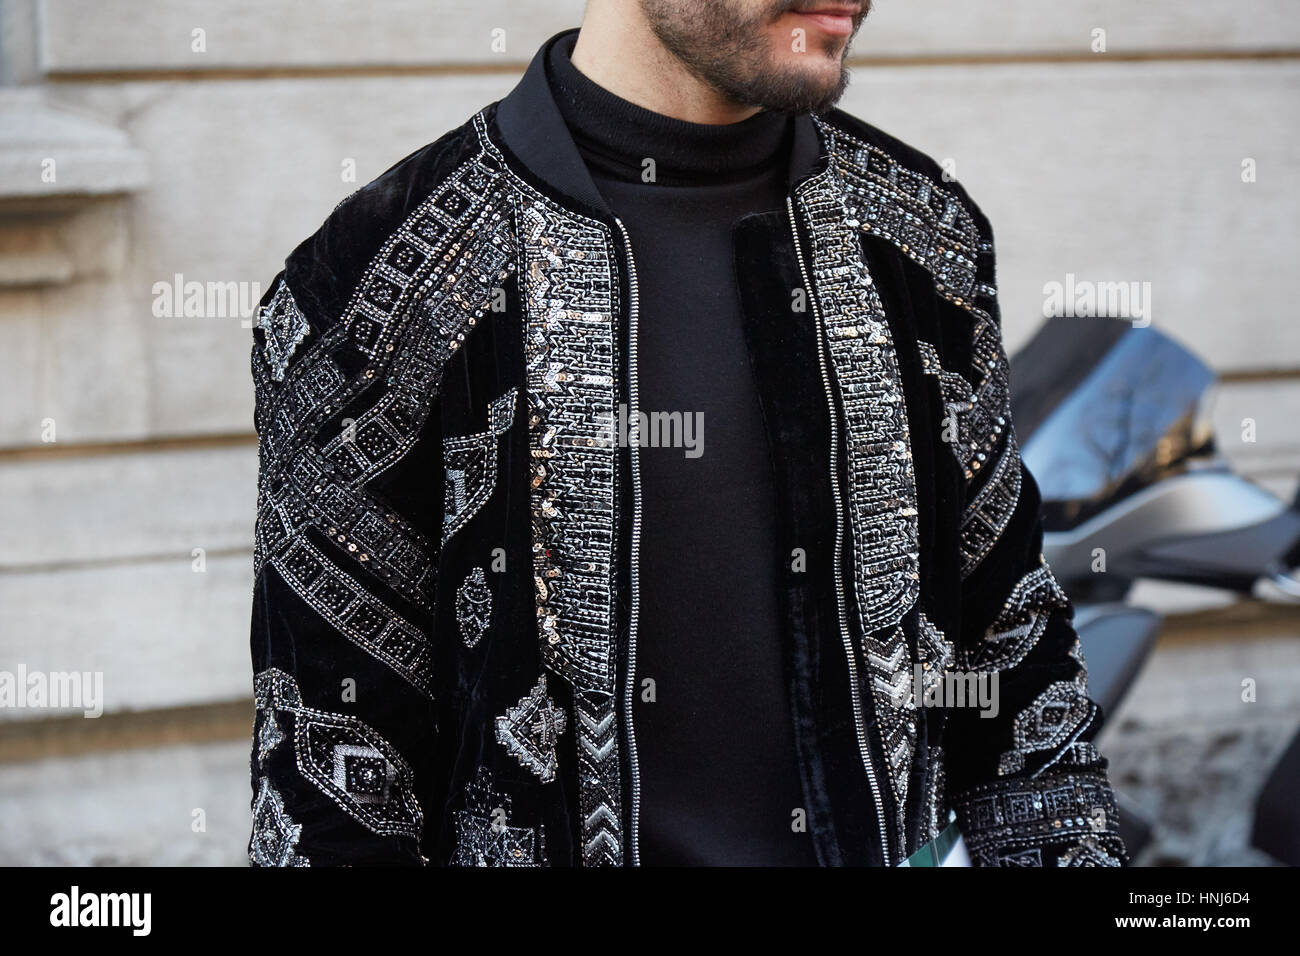 MILAN - JANUARY 16: Man with black velvet jacket with gems and sequins decorations before Cedric Charlier fashion show, Milan Fashion Week street styl Stock Photo